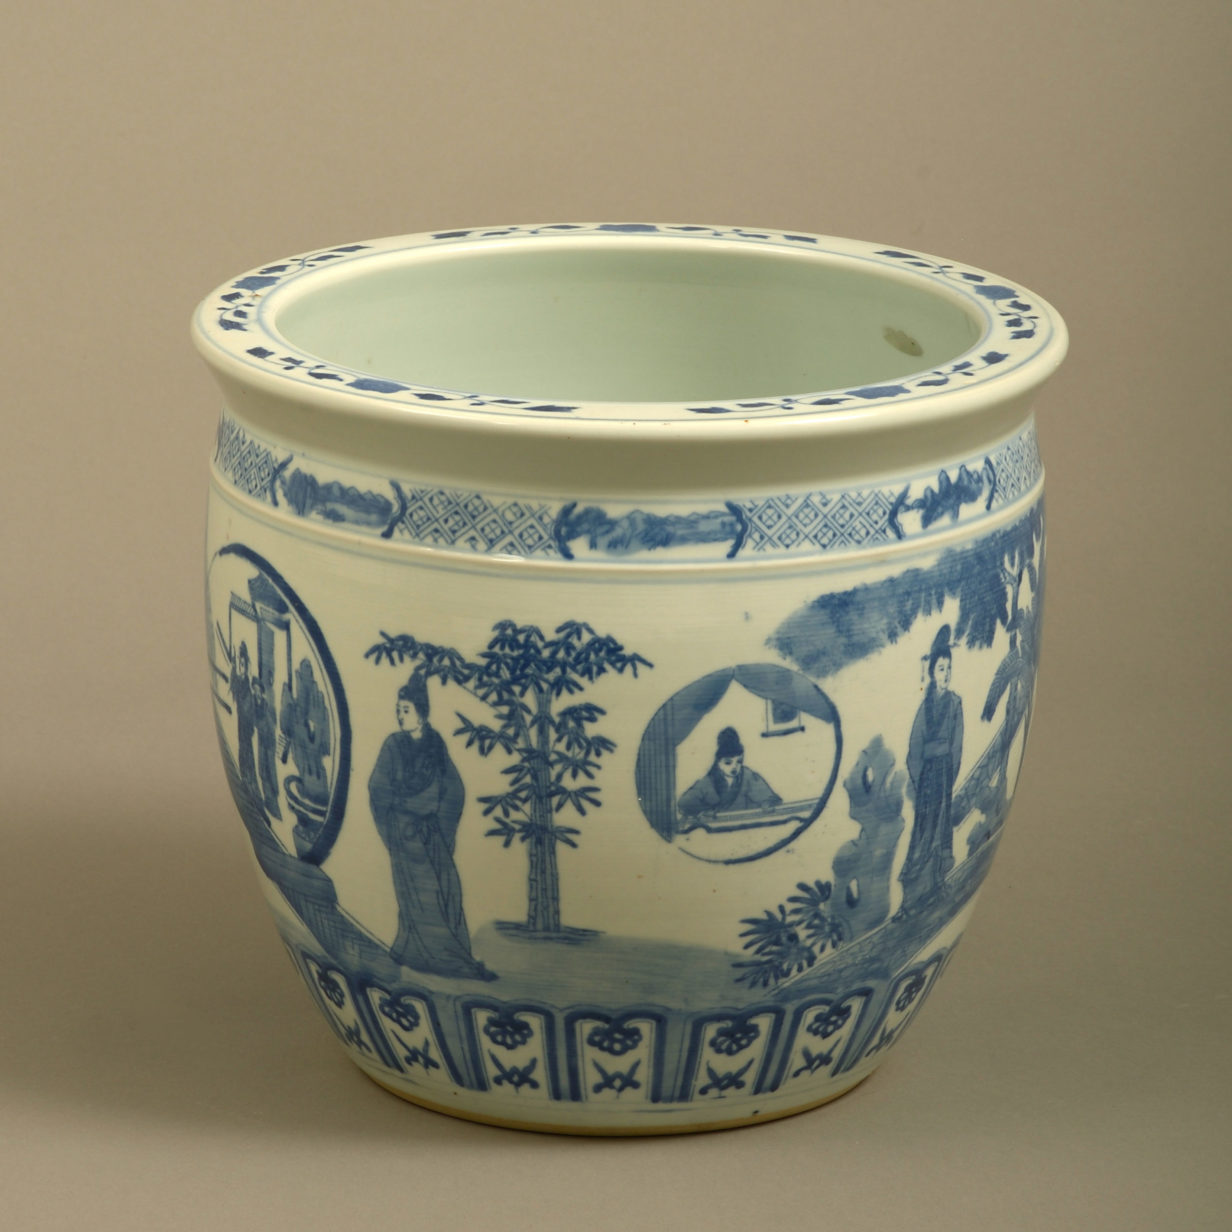 A mid-20th century blue and white porcelain jardiniere